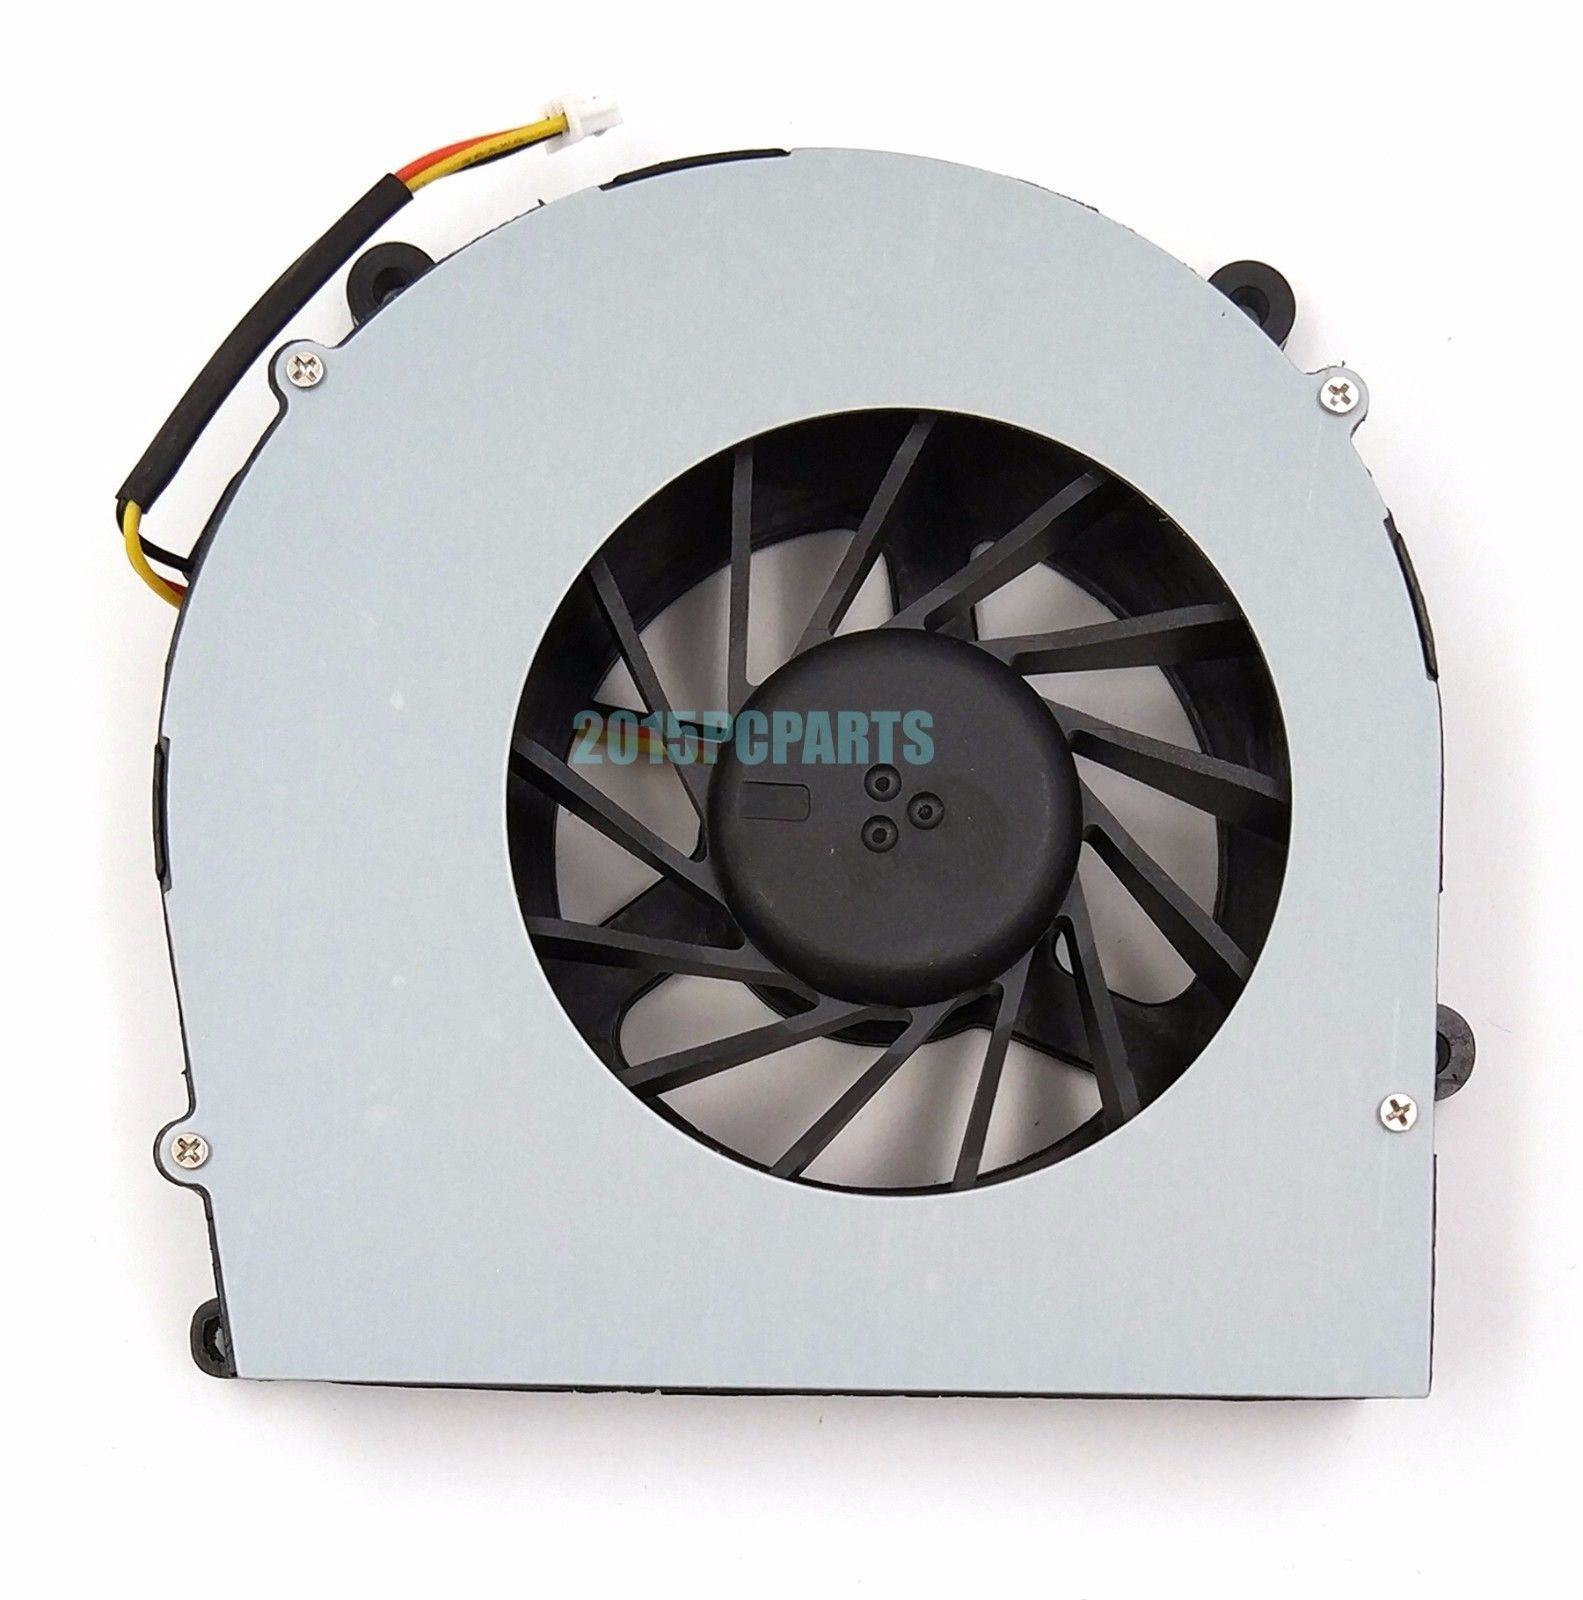 New for Clevo Sager NP8130 NP8150 NP9150 P150 P151 P170 GPU Video card Fan